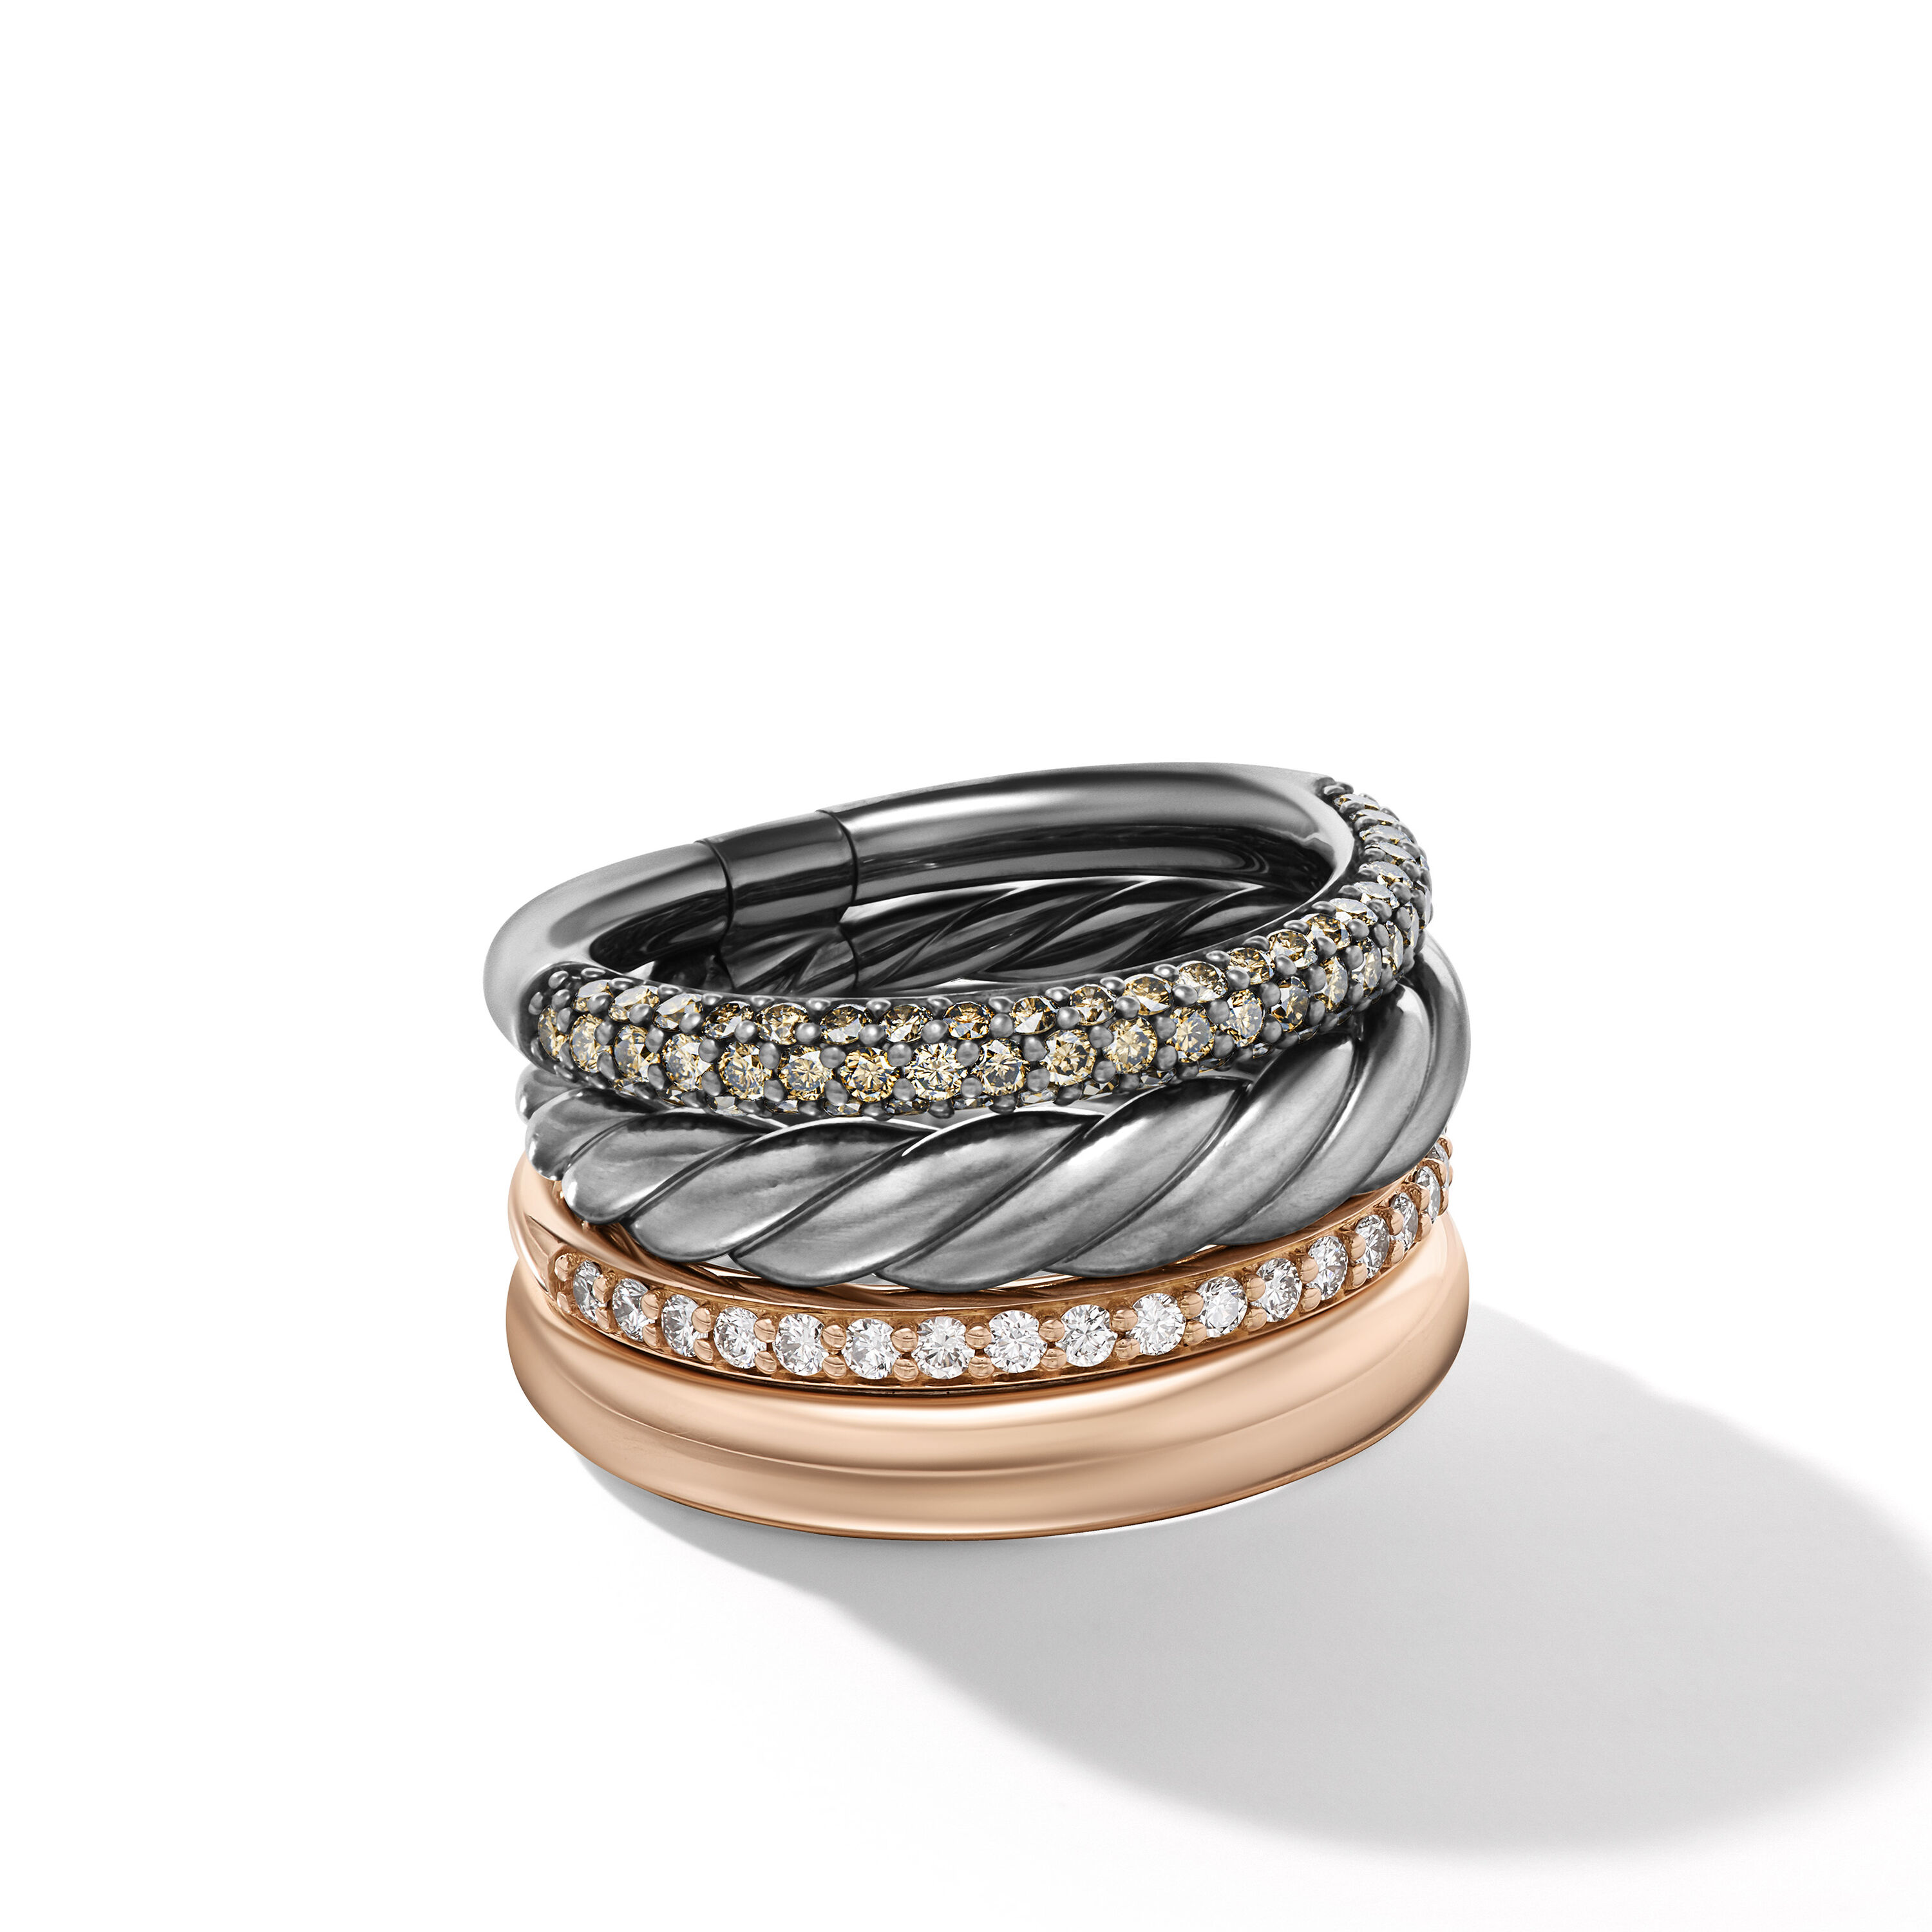 DY Mercer™ Melange Multi Row Ring in Sterling Silver with 18K Rose Gold and Diamonds, 14mm